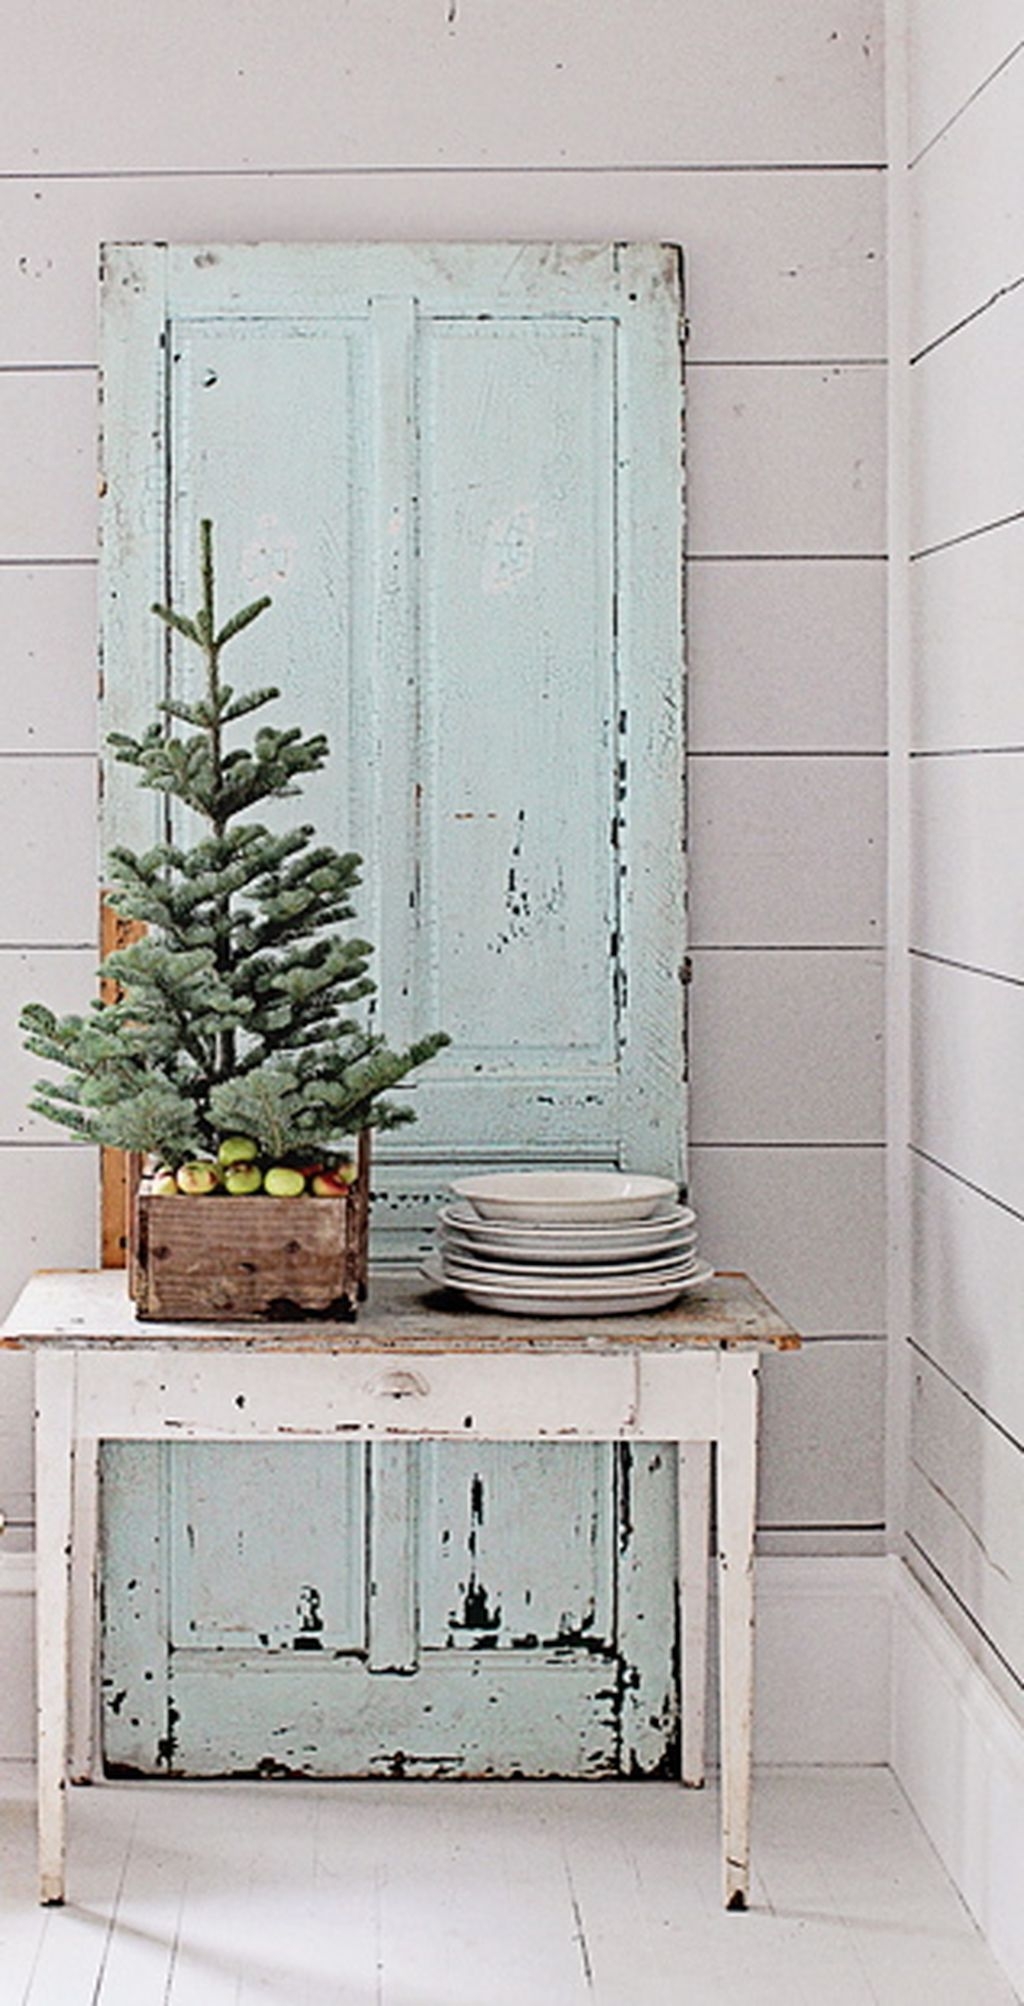 Inspiring Home Decoration Ideas With Small Christmas Tree 28